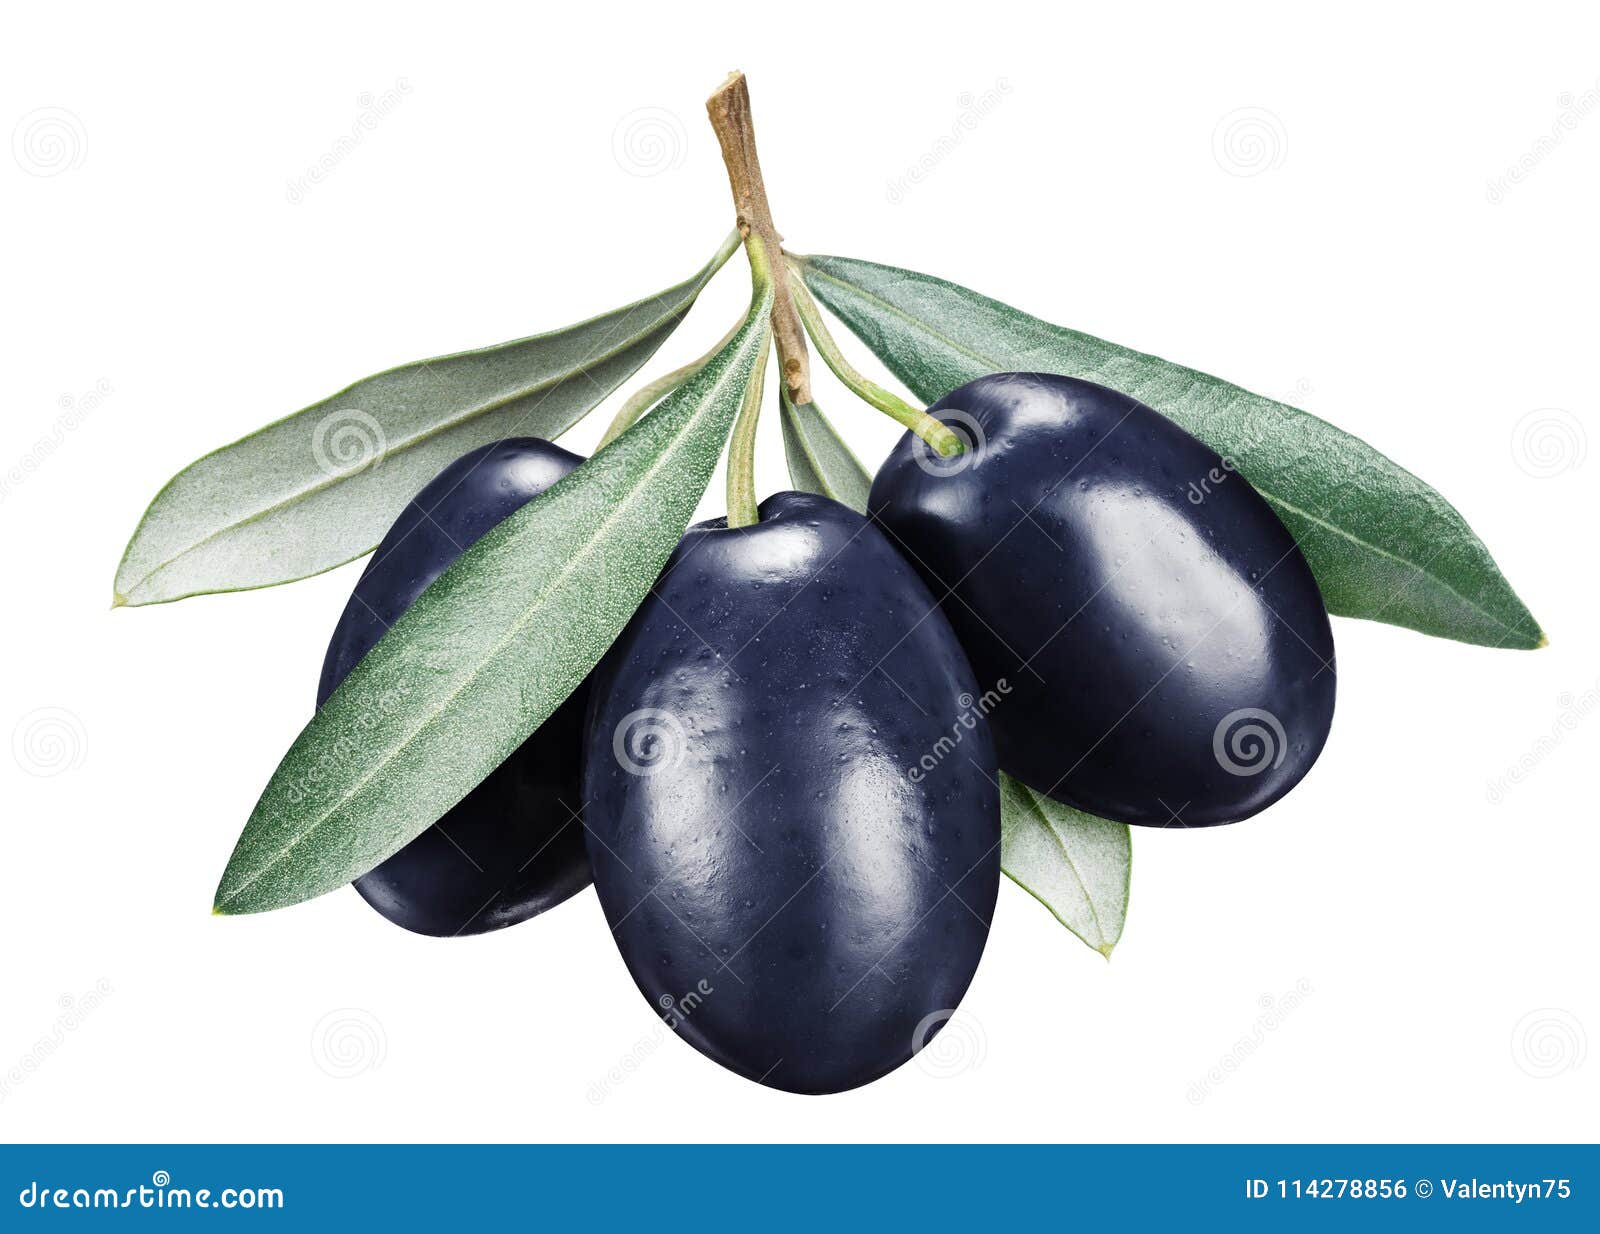 Three Black Ripe Olive Berries with Leaves. Stock Photo - Image of